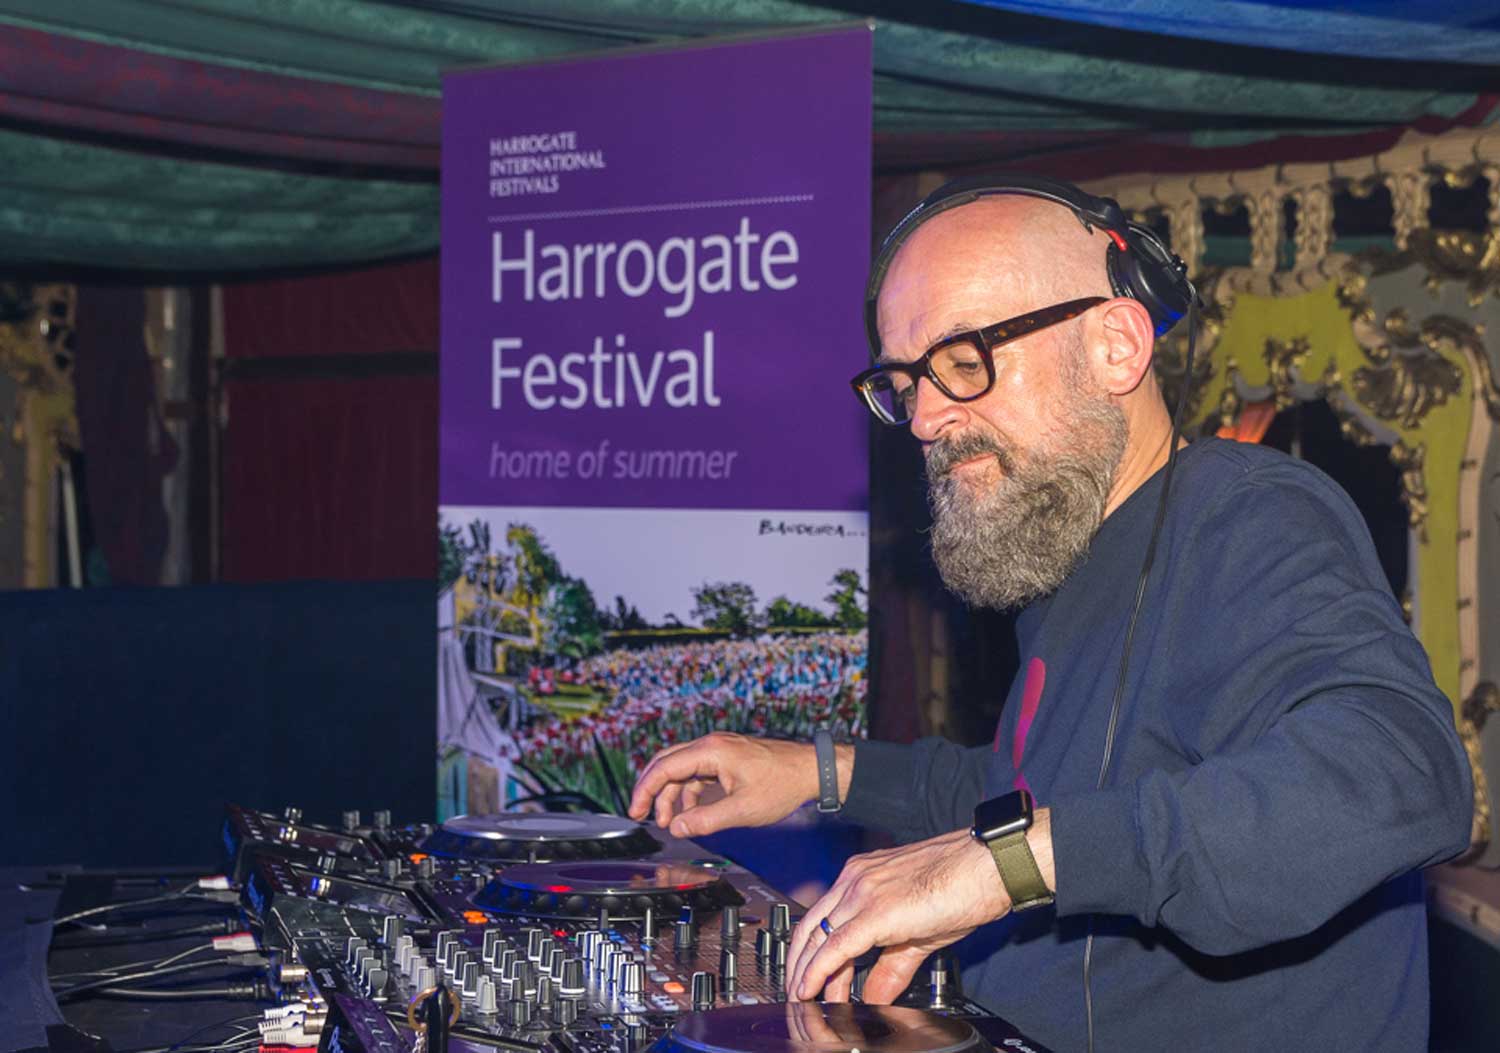 Experience an exclusive House DJ set from Graeme Park on Friday 28 June from 8pm